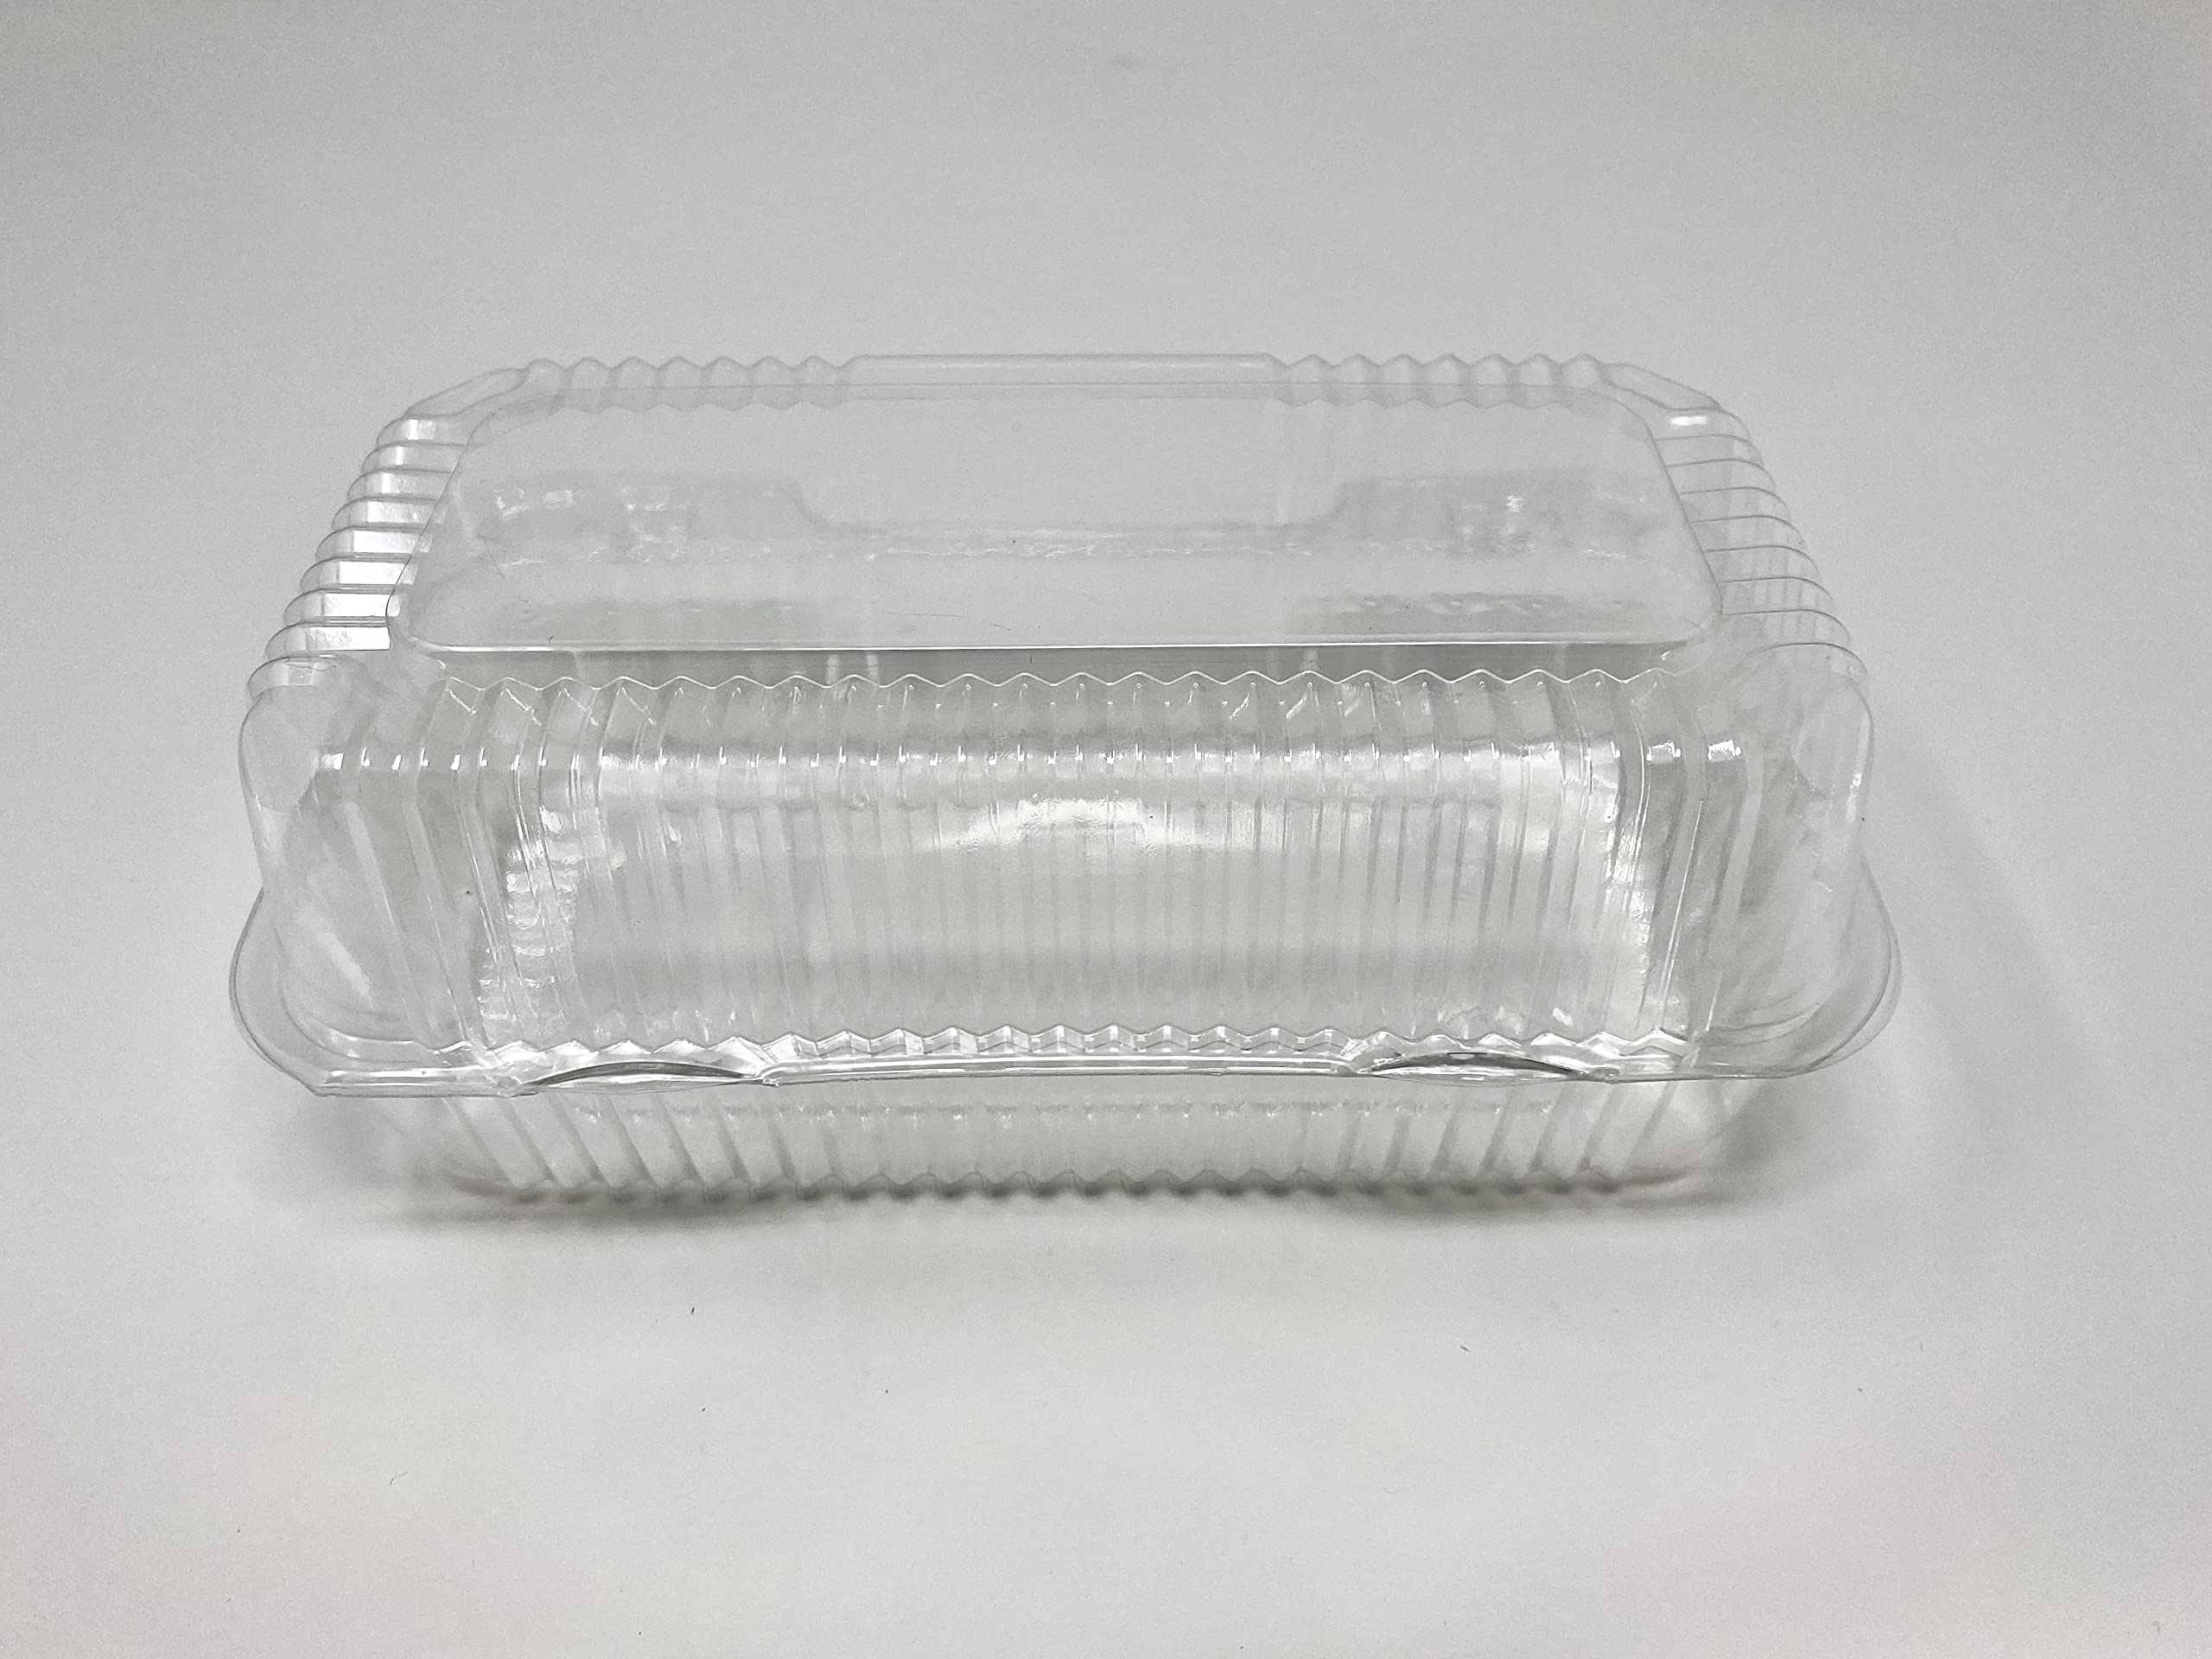 Hinged Lid PE Containers